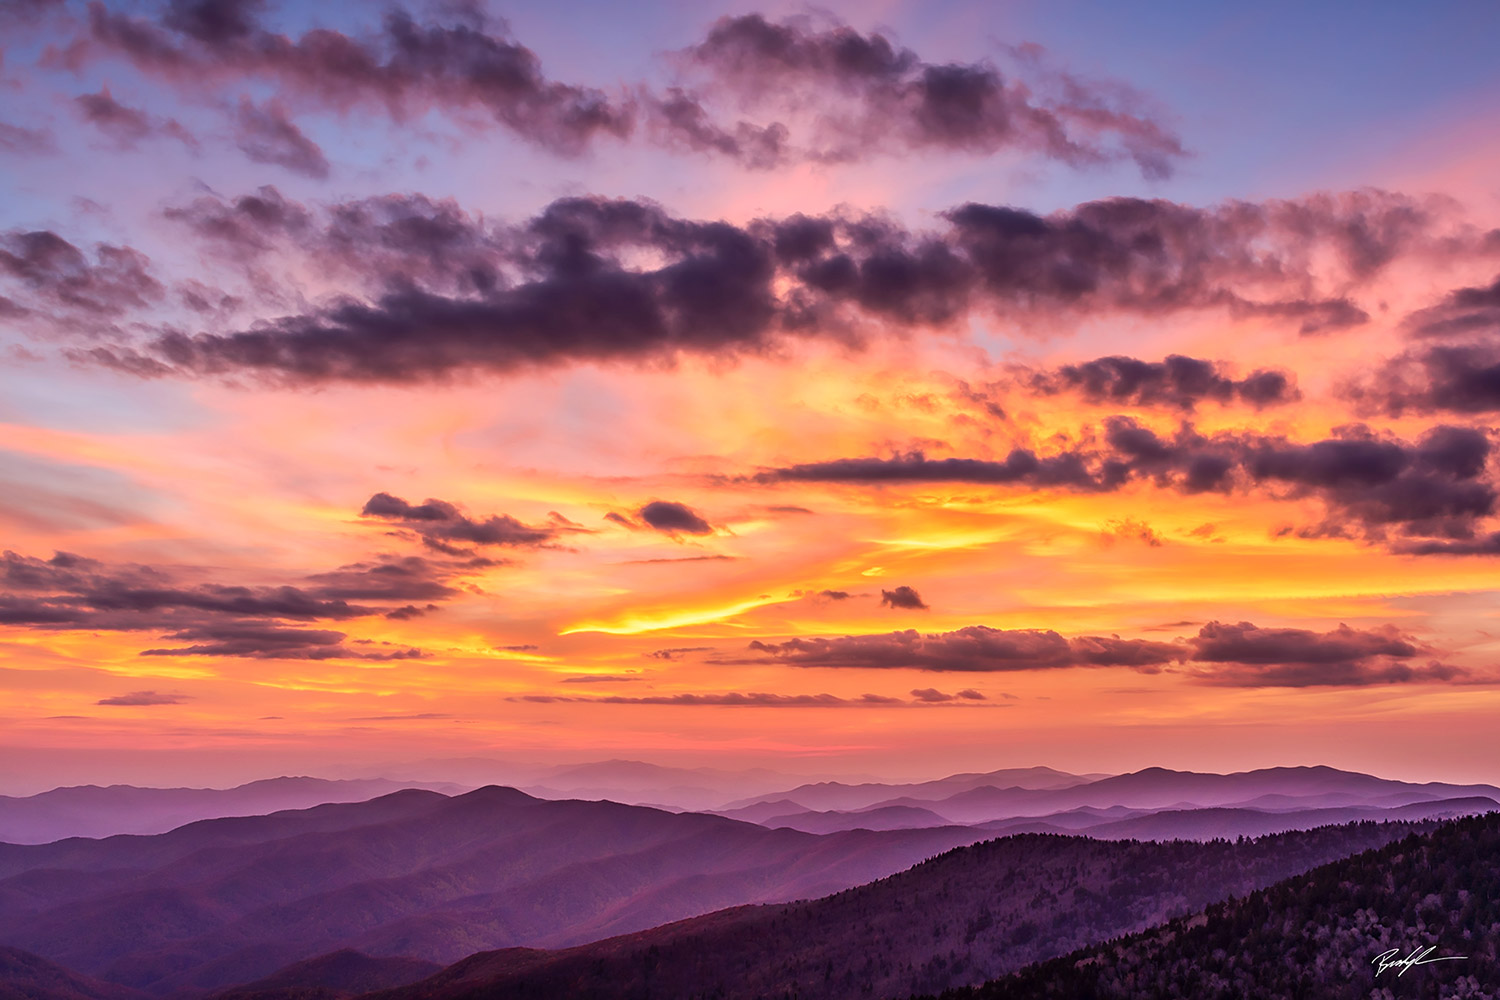 Sunset, Clingman's Dome, Smoky Mountain National Park, Tennessee